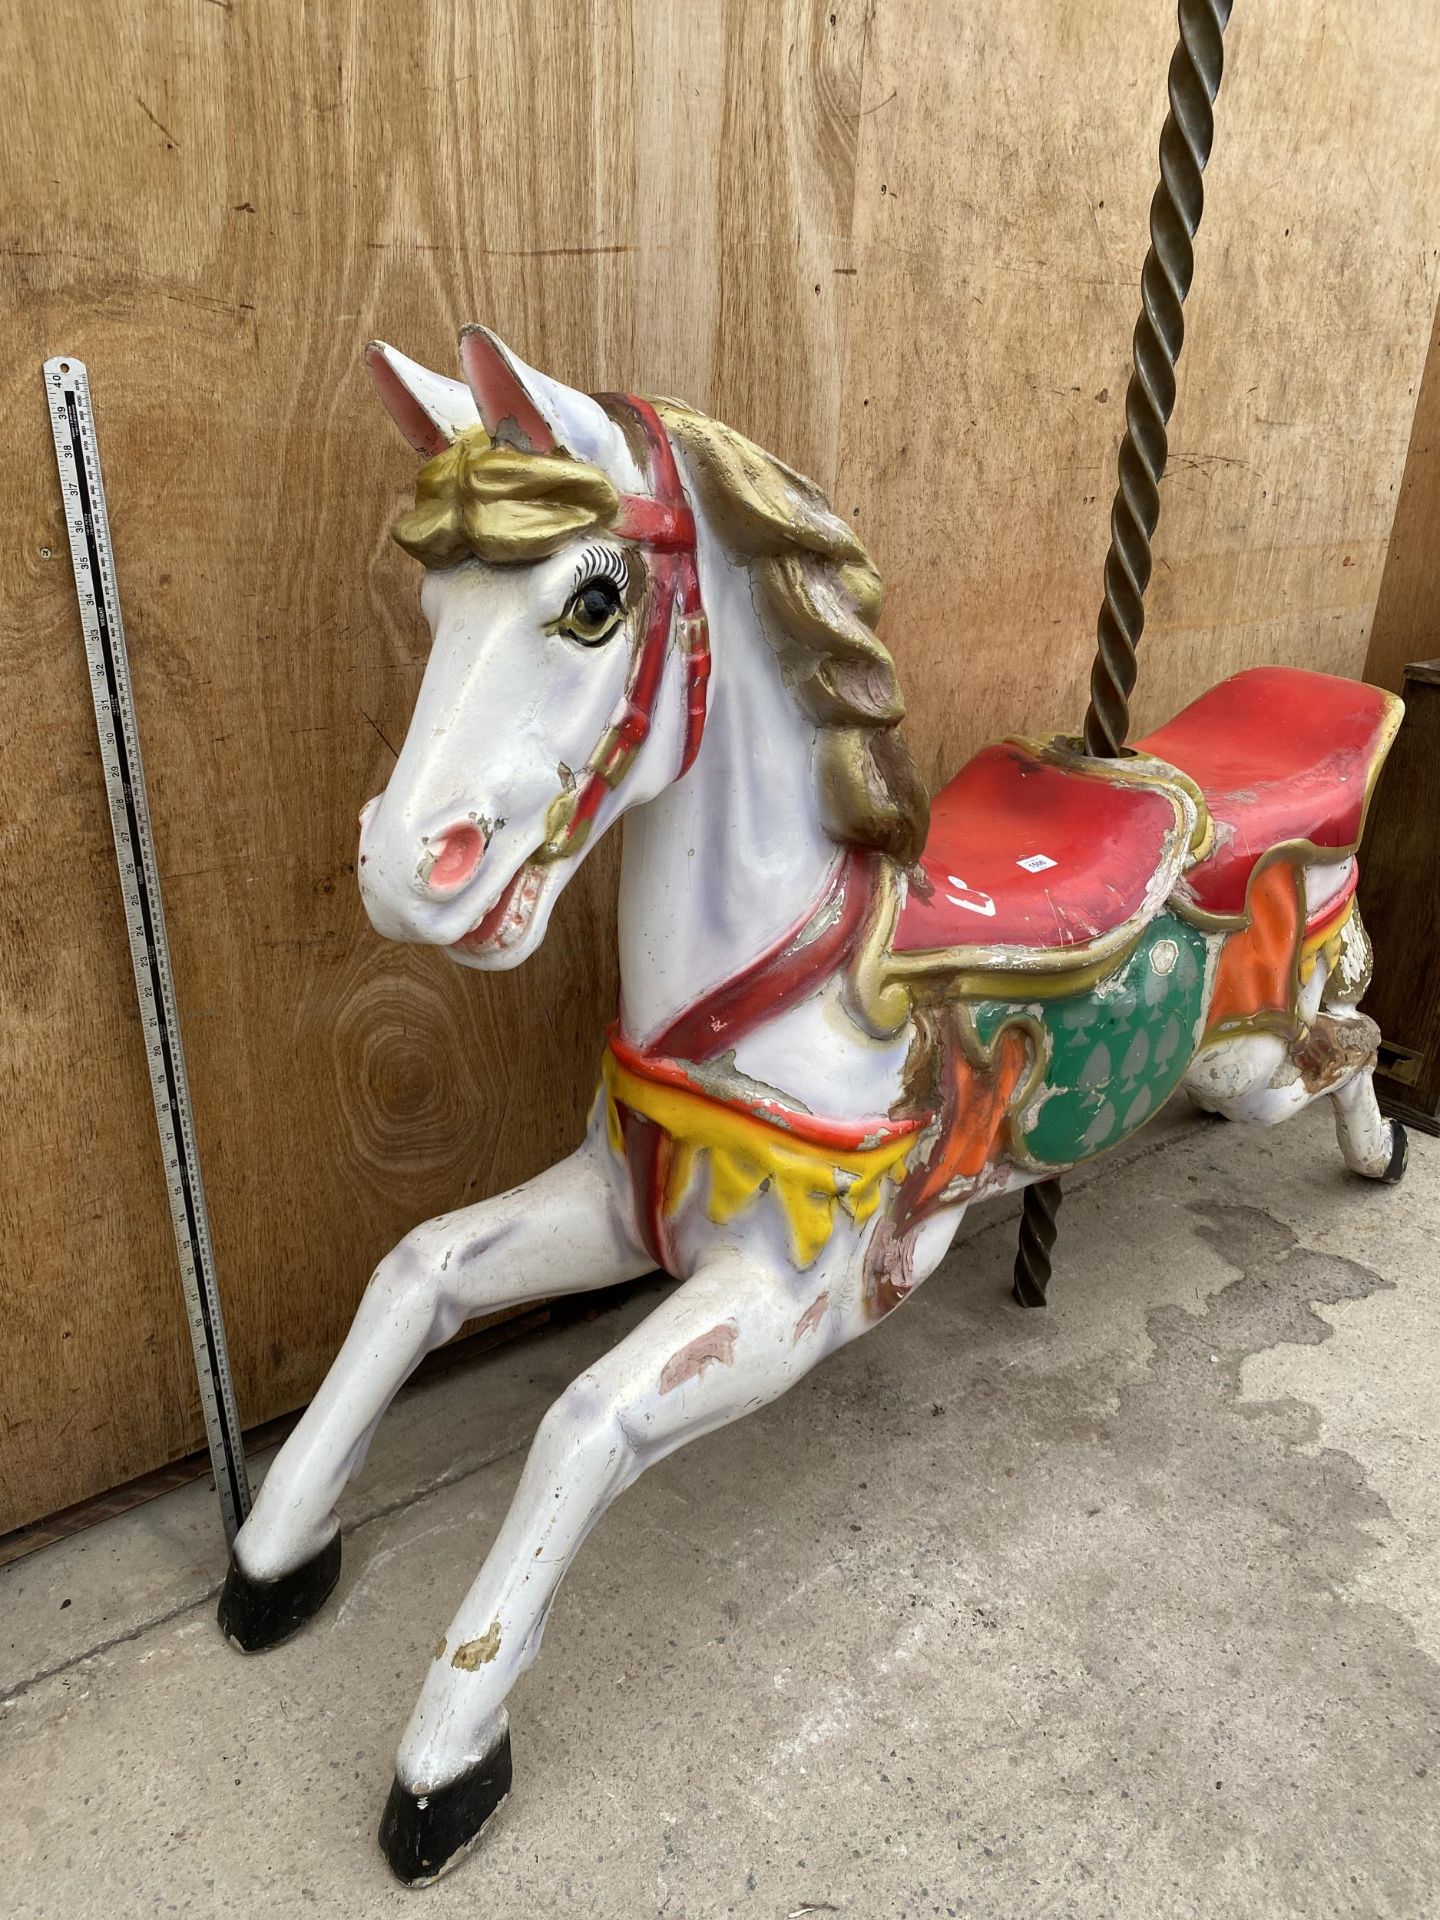 A BELIEVED ORIGINAL EX FAIRGROUND RIDE GALLOPER WITH DOUBLE SEAT AND TURNED BRASS POLE - Image 3 of 8